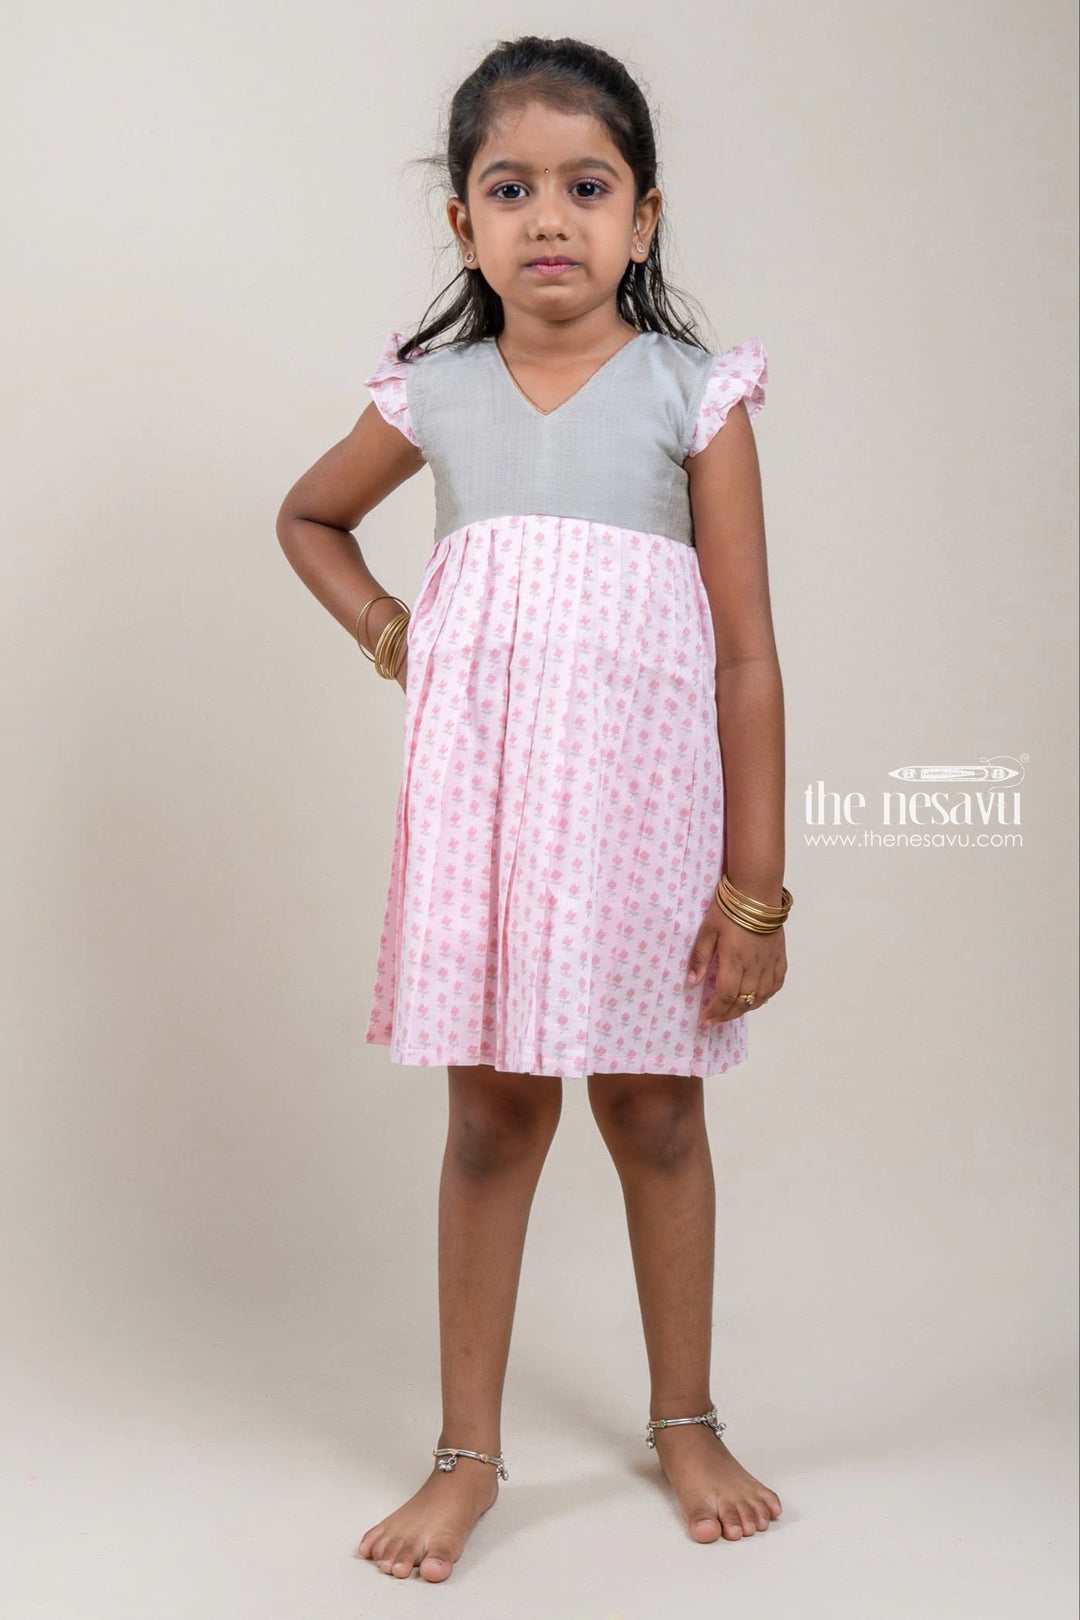 The Nesavu Girls Cotton Frock Pretty Dark Grey And Pink Floral Printed Pleated Cotton Frock For Girls Nesavu 12 (3M) / Pink / Cotton GFC757E-12 Gorgeous Floral Printed Cotton Frock For Girls | The Nesavu